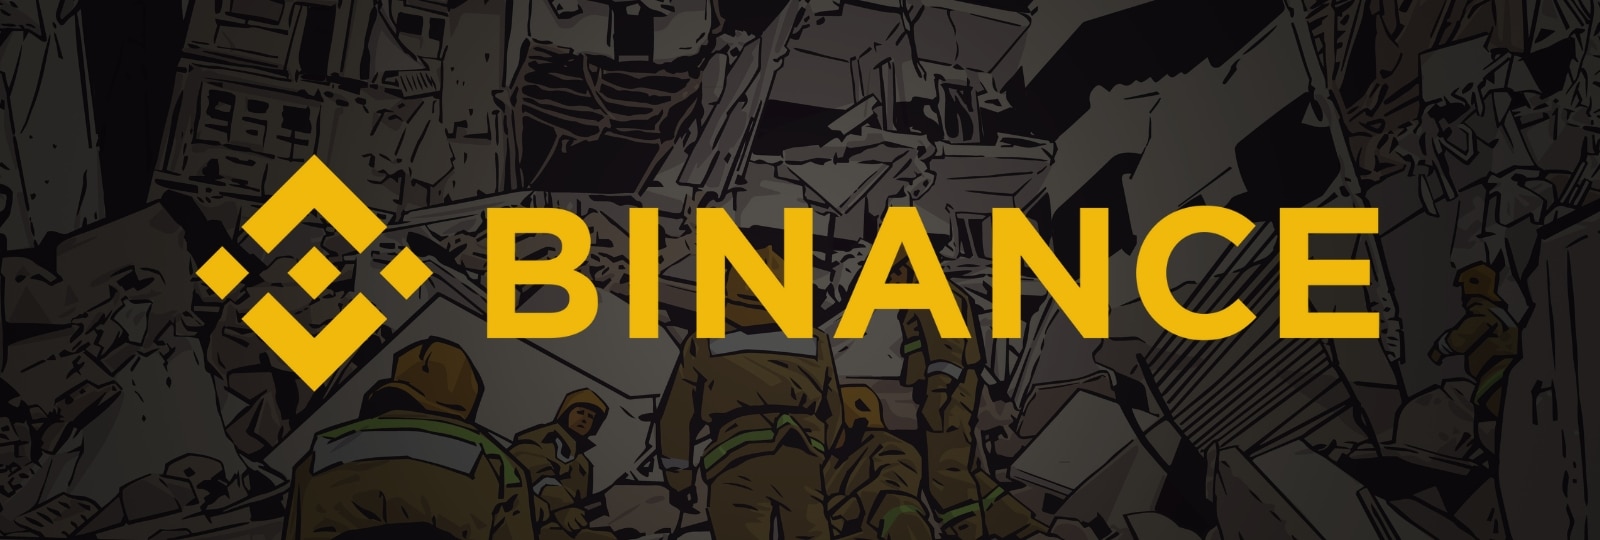 Binance airdrops $3M in BNB to earthquake-affected Morocco users